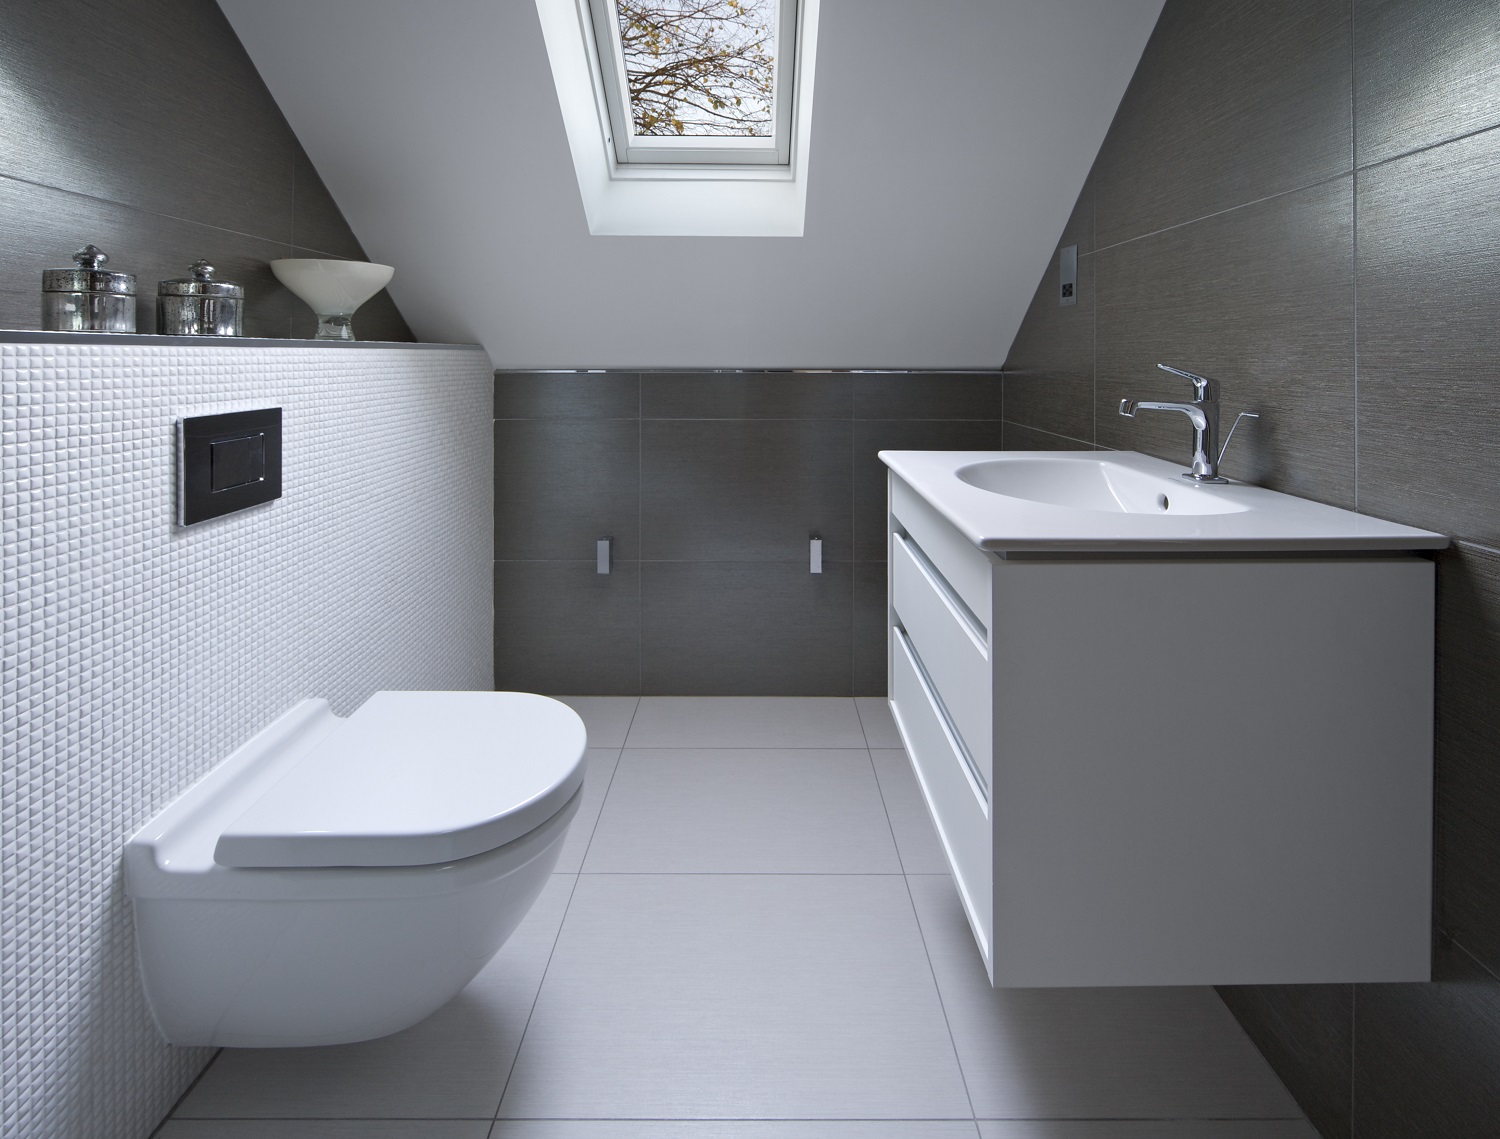 Lifestyle image of a small attic bathroom with large white floor tiles, large black and small white wall tiles, a wall hung toilet, a wall hung washbasin unit and a skylight